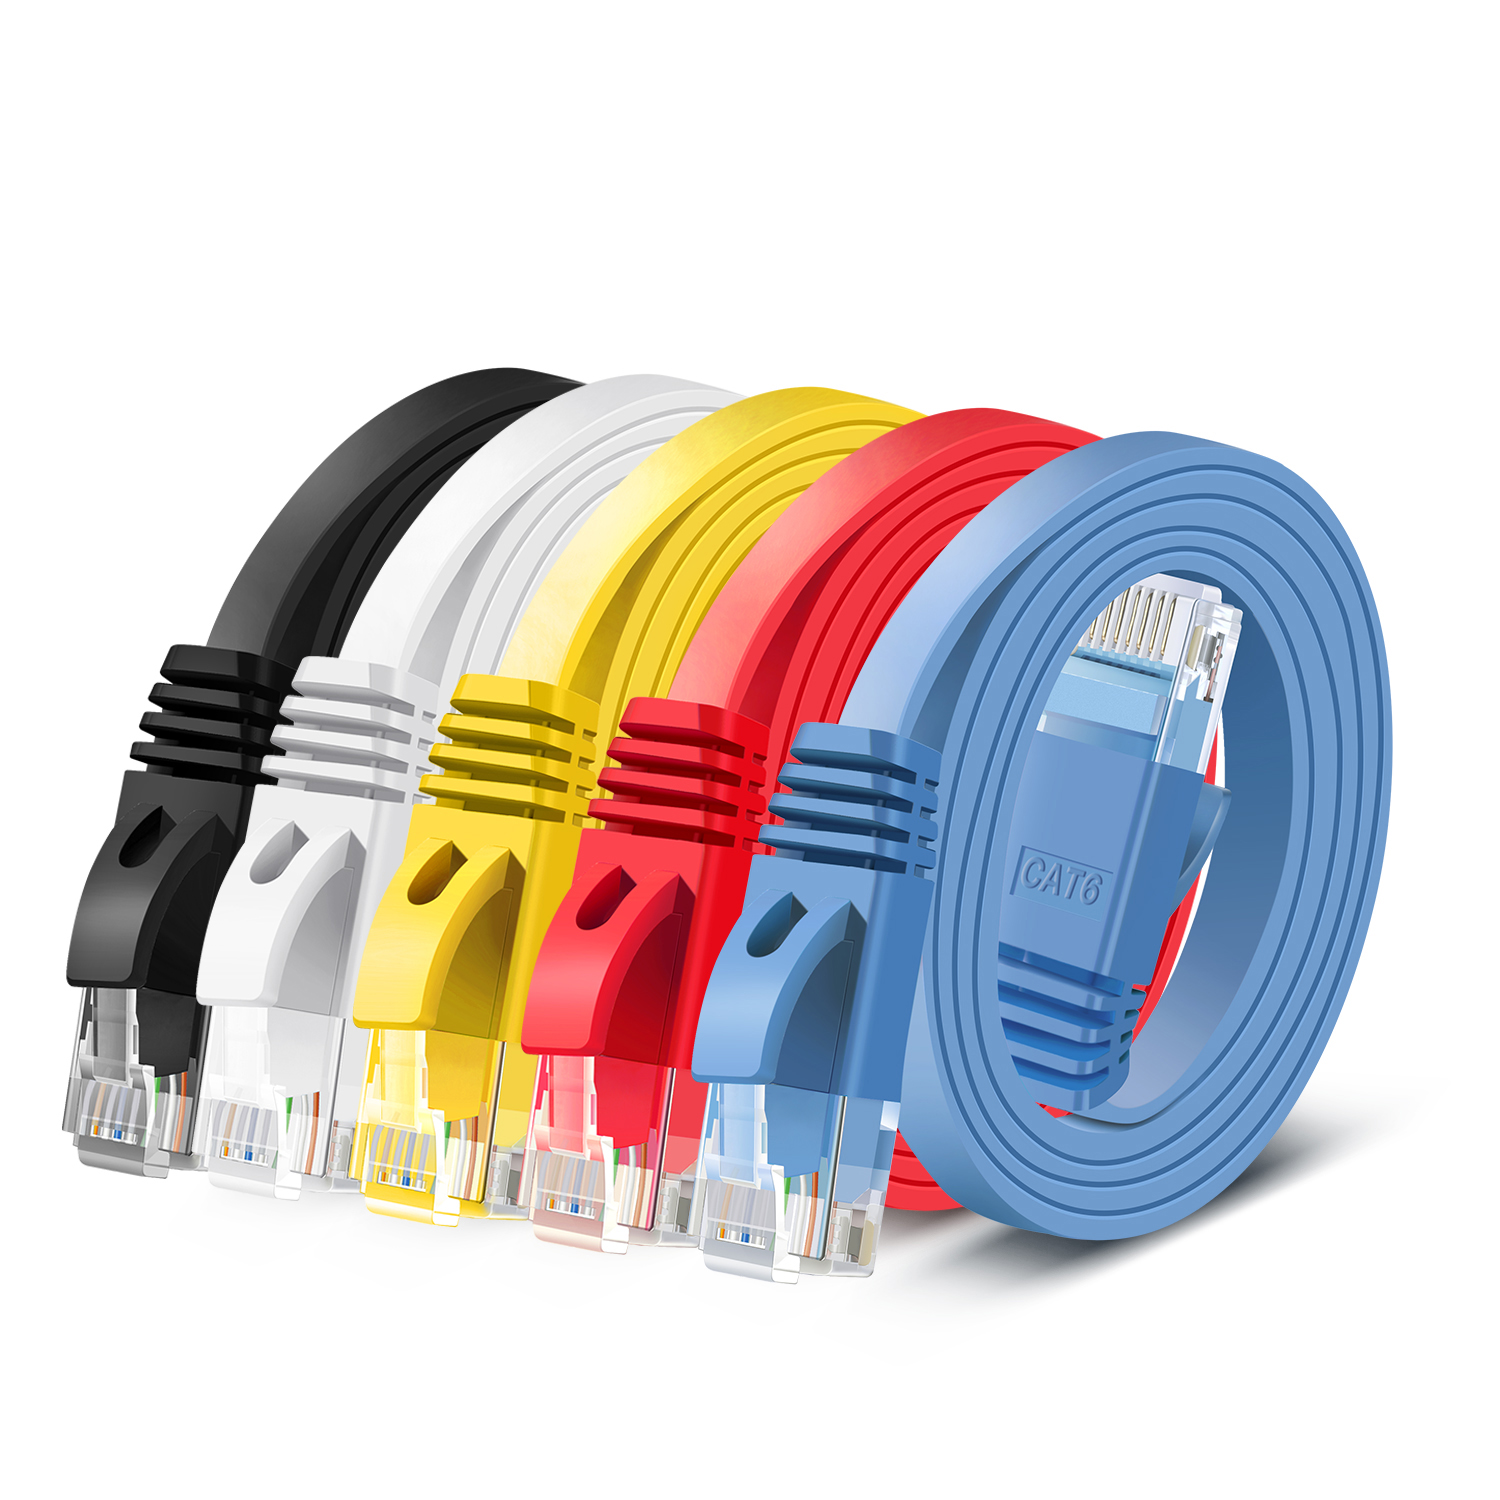 Ethernet Cable Cat 6 Flat Cable, Cat 6 Ethernet Cable 5 ft, Flat Wire (Multi-Color 5 Pack) Cat6 Ether Network Internet Cord Performance Tangle Free LAN Internet Ethernet Patch Cables Connector 